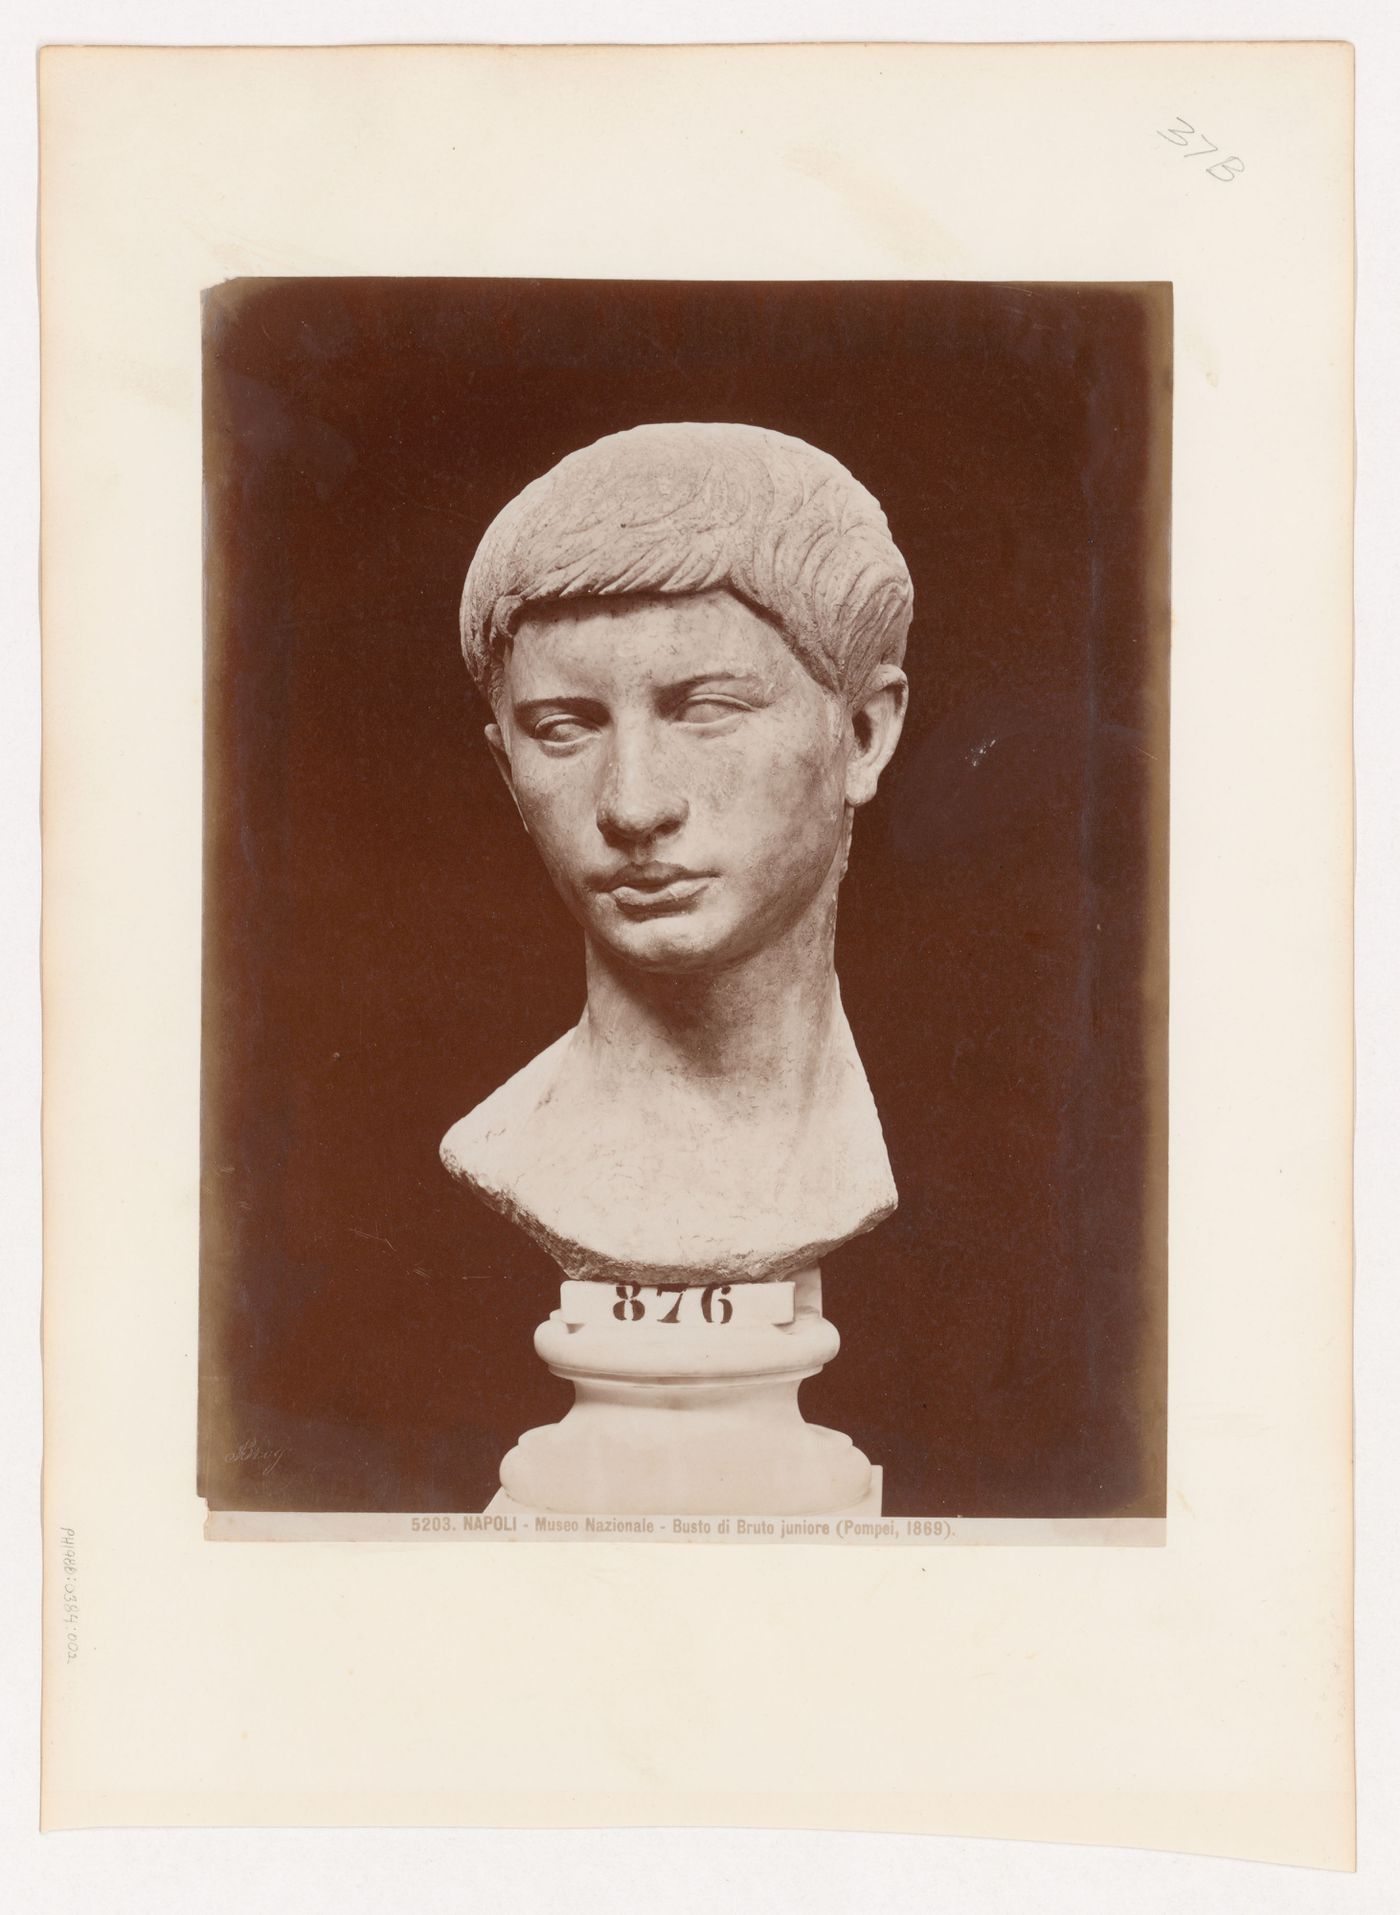 Photograph of a bust of Bruto juniore, Museo nazionale di Napoli, Naples, Italy